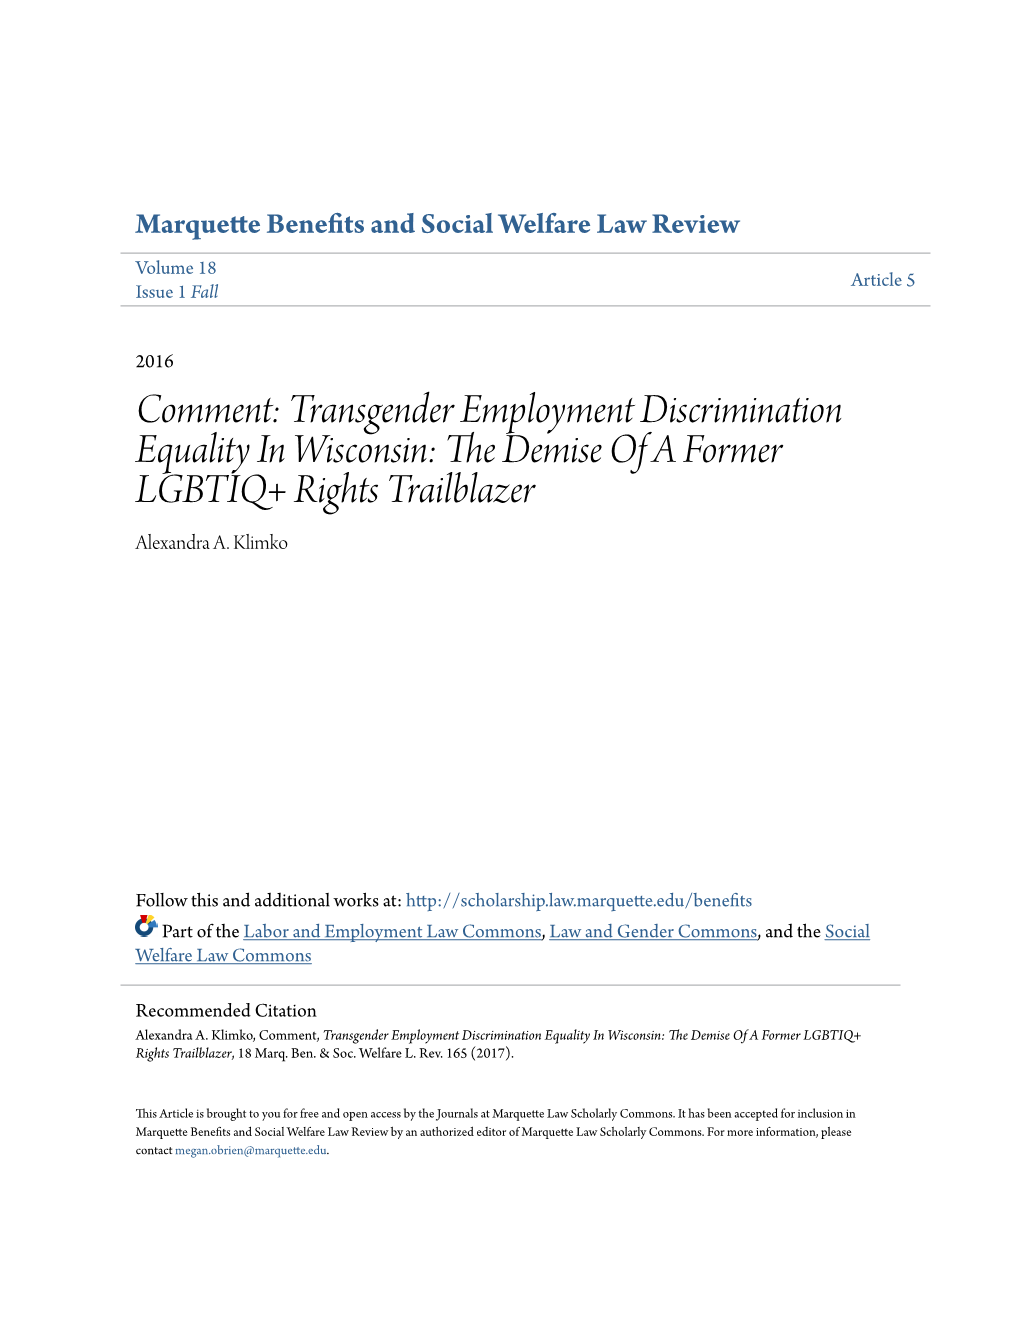 Transgender Employment Discrimination Equality in Wisconsin: the Demise of a Former LGBTIQ+ Rights Trailblazer Alexandra A